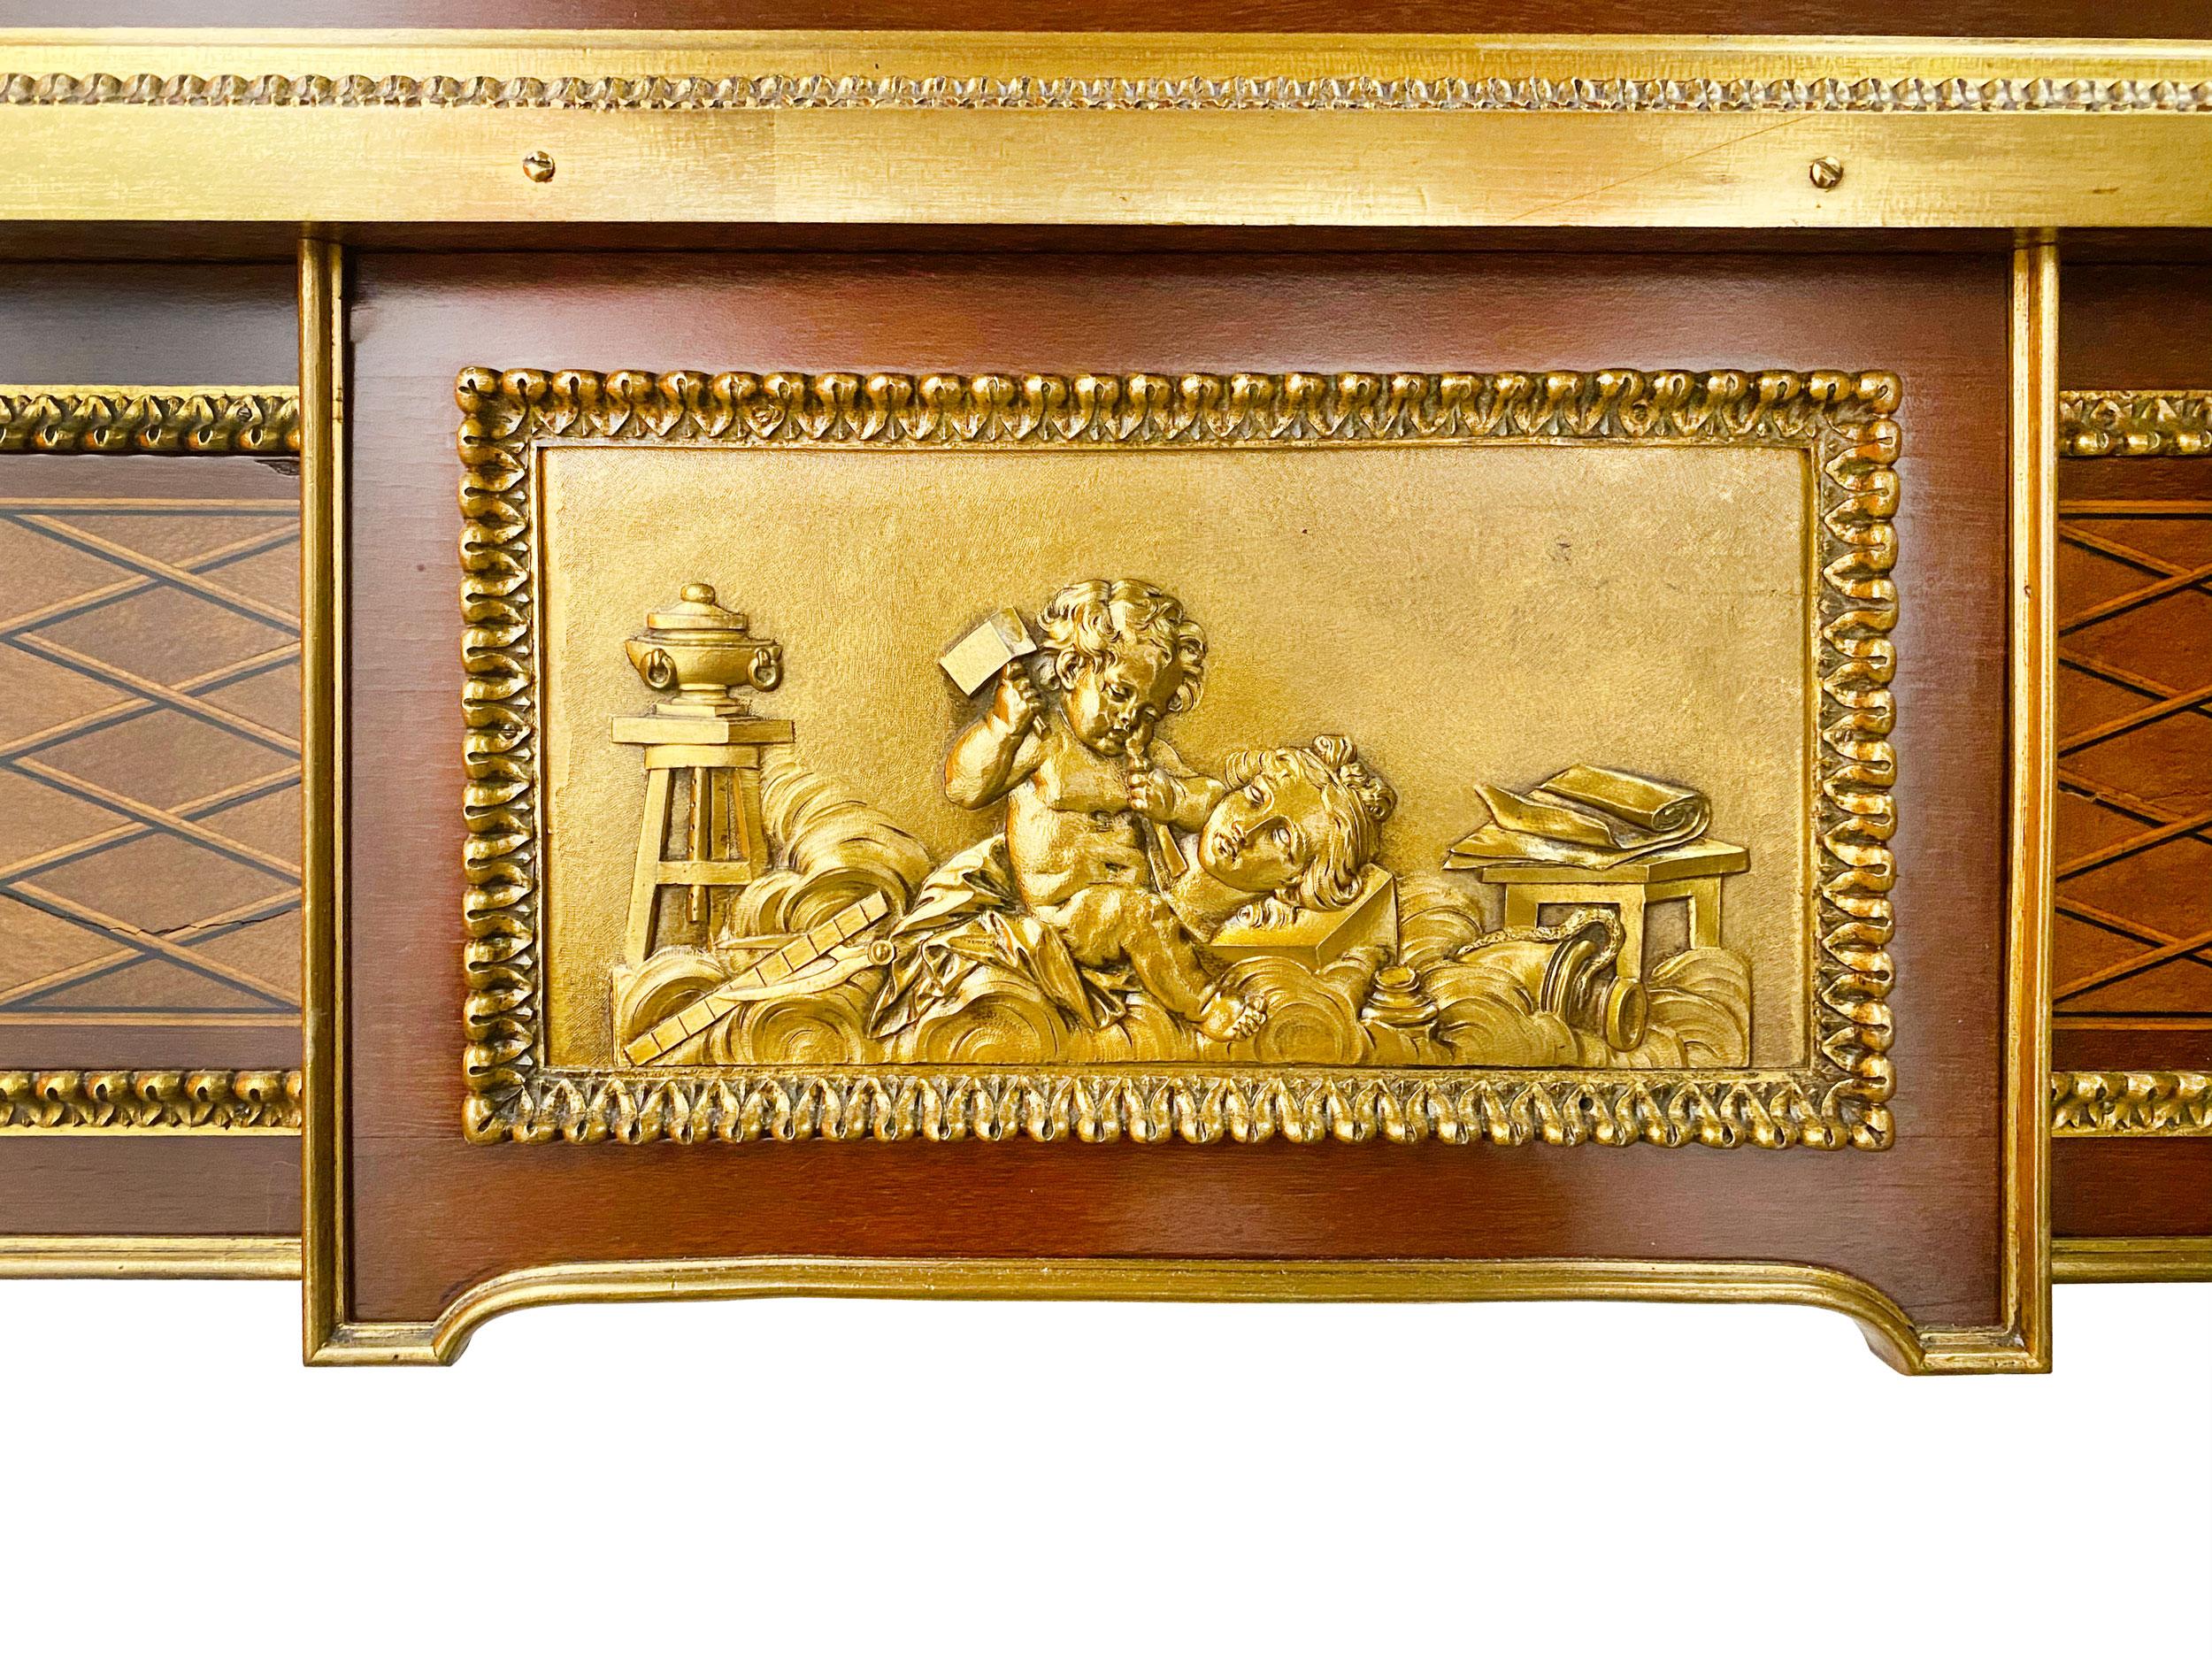 A French ormolu-mounted amaranth, sycamore, marquetry and parquetry bureau a cylindre after the model by Jean-Henri Riesener, by Alfred Beurdeley, Paris, last quarter 19th centuryThe rectangular galleried top inlaid wth lozenge parquetry, above a